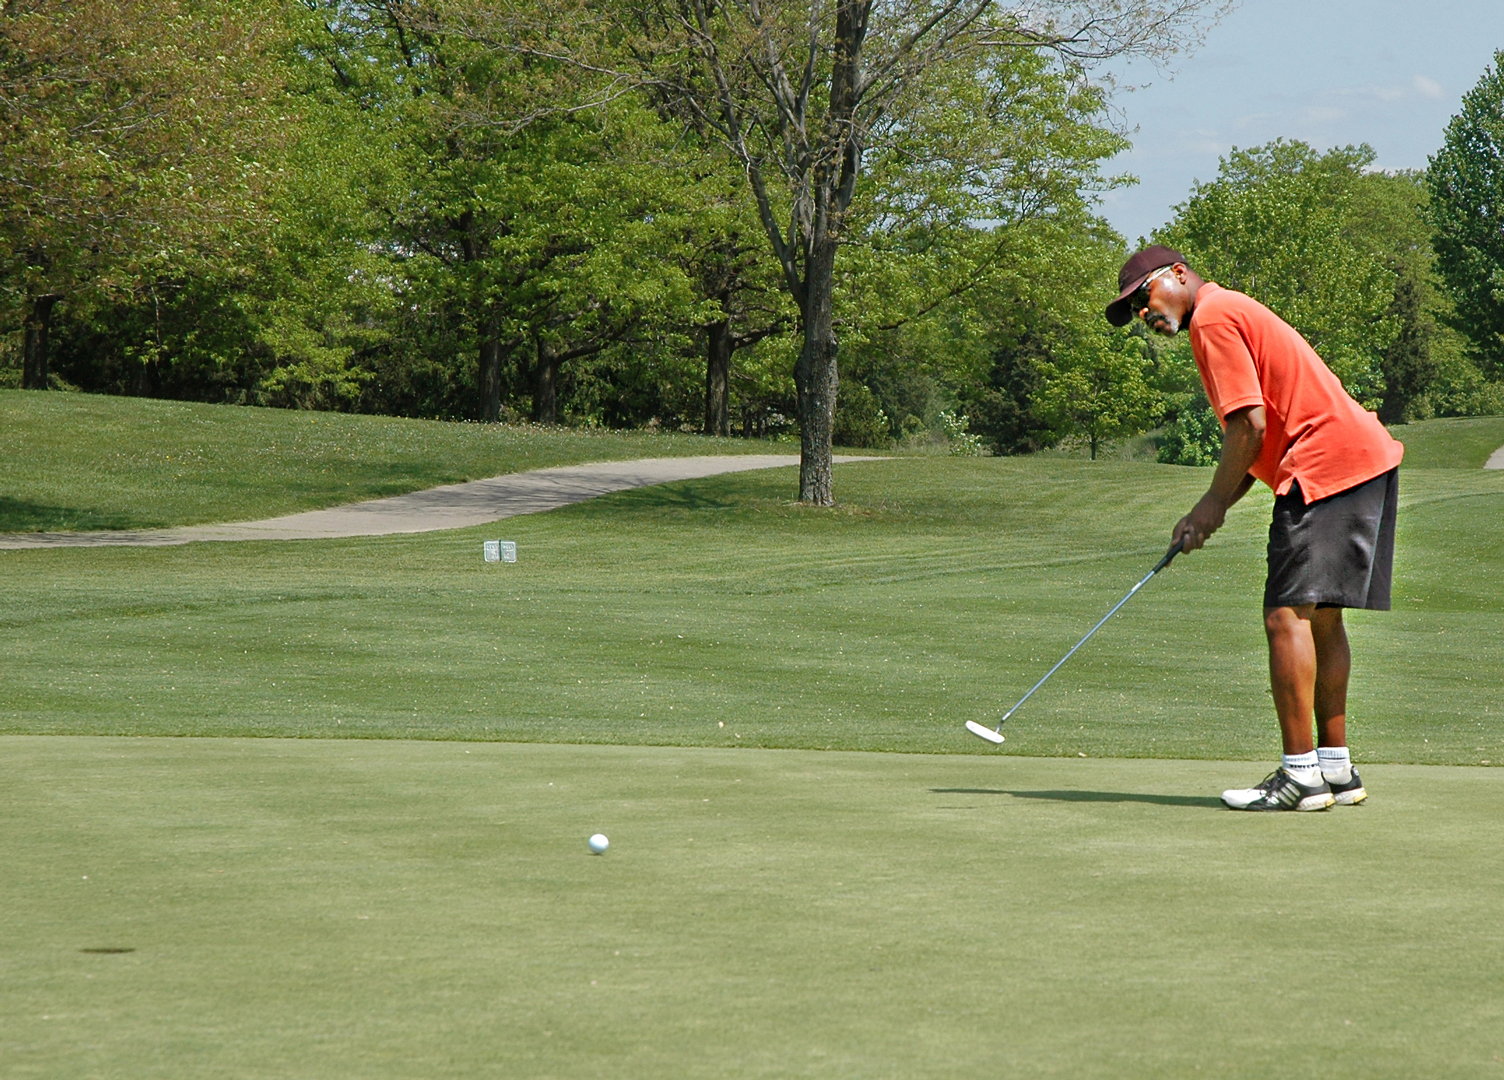 A golfer putting on the 6th green at Blacklick Woods Golf Course